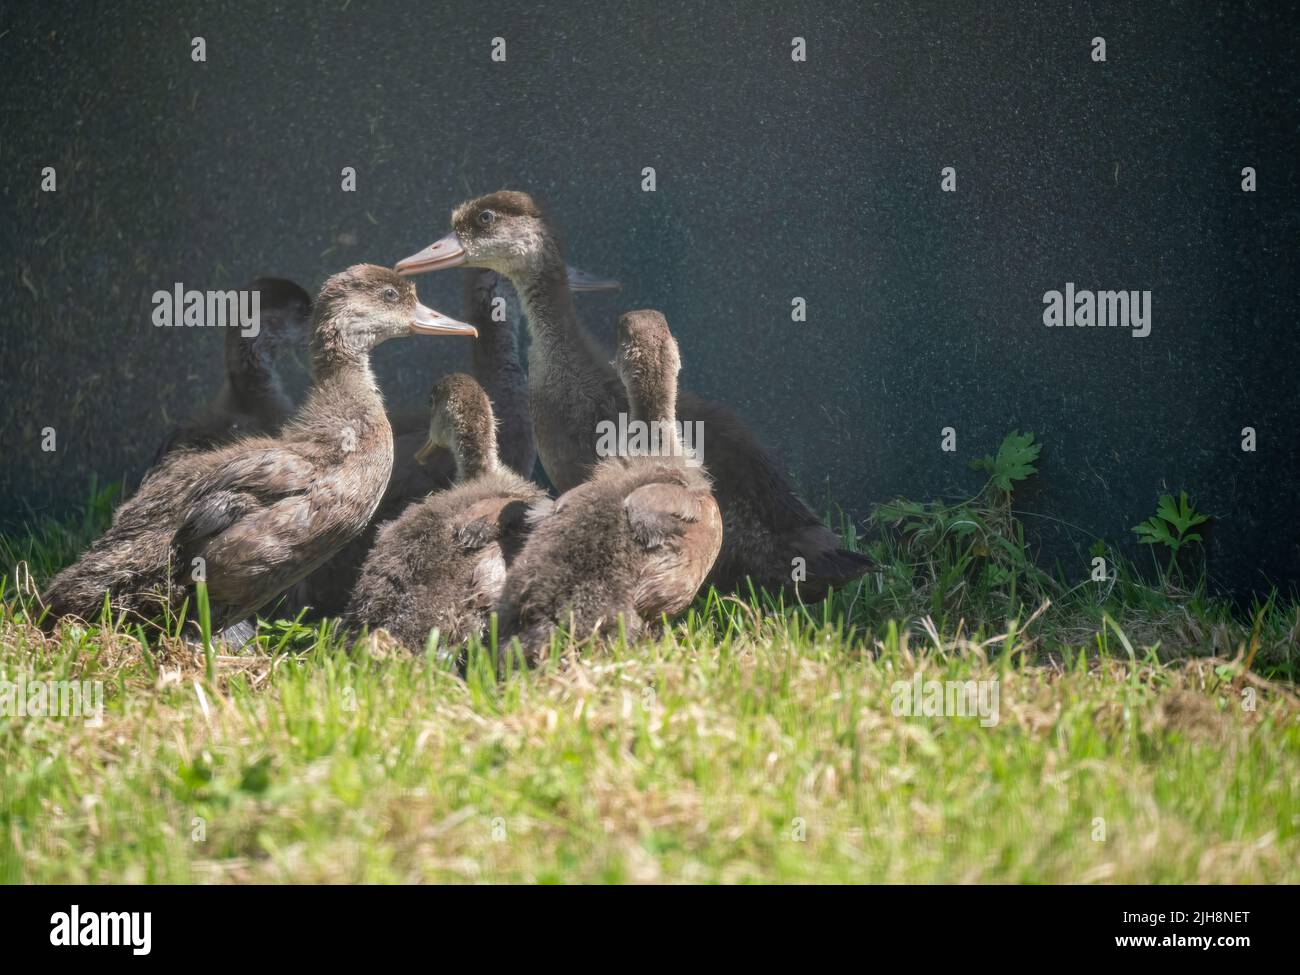 a clutch of young brown goslings (Anser) Stock Photo